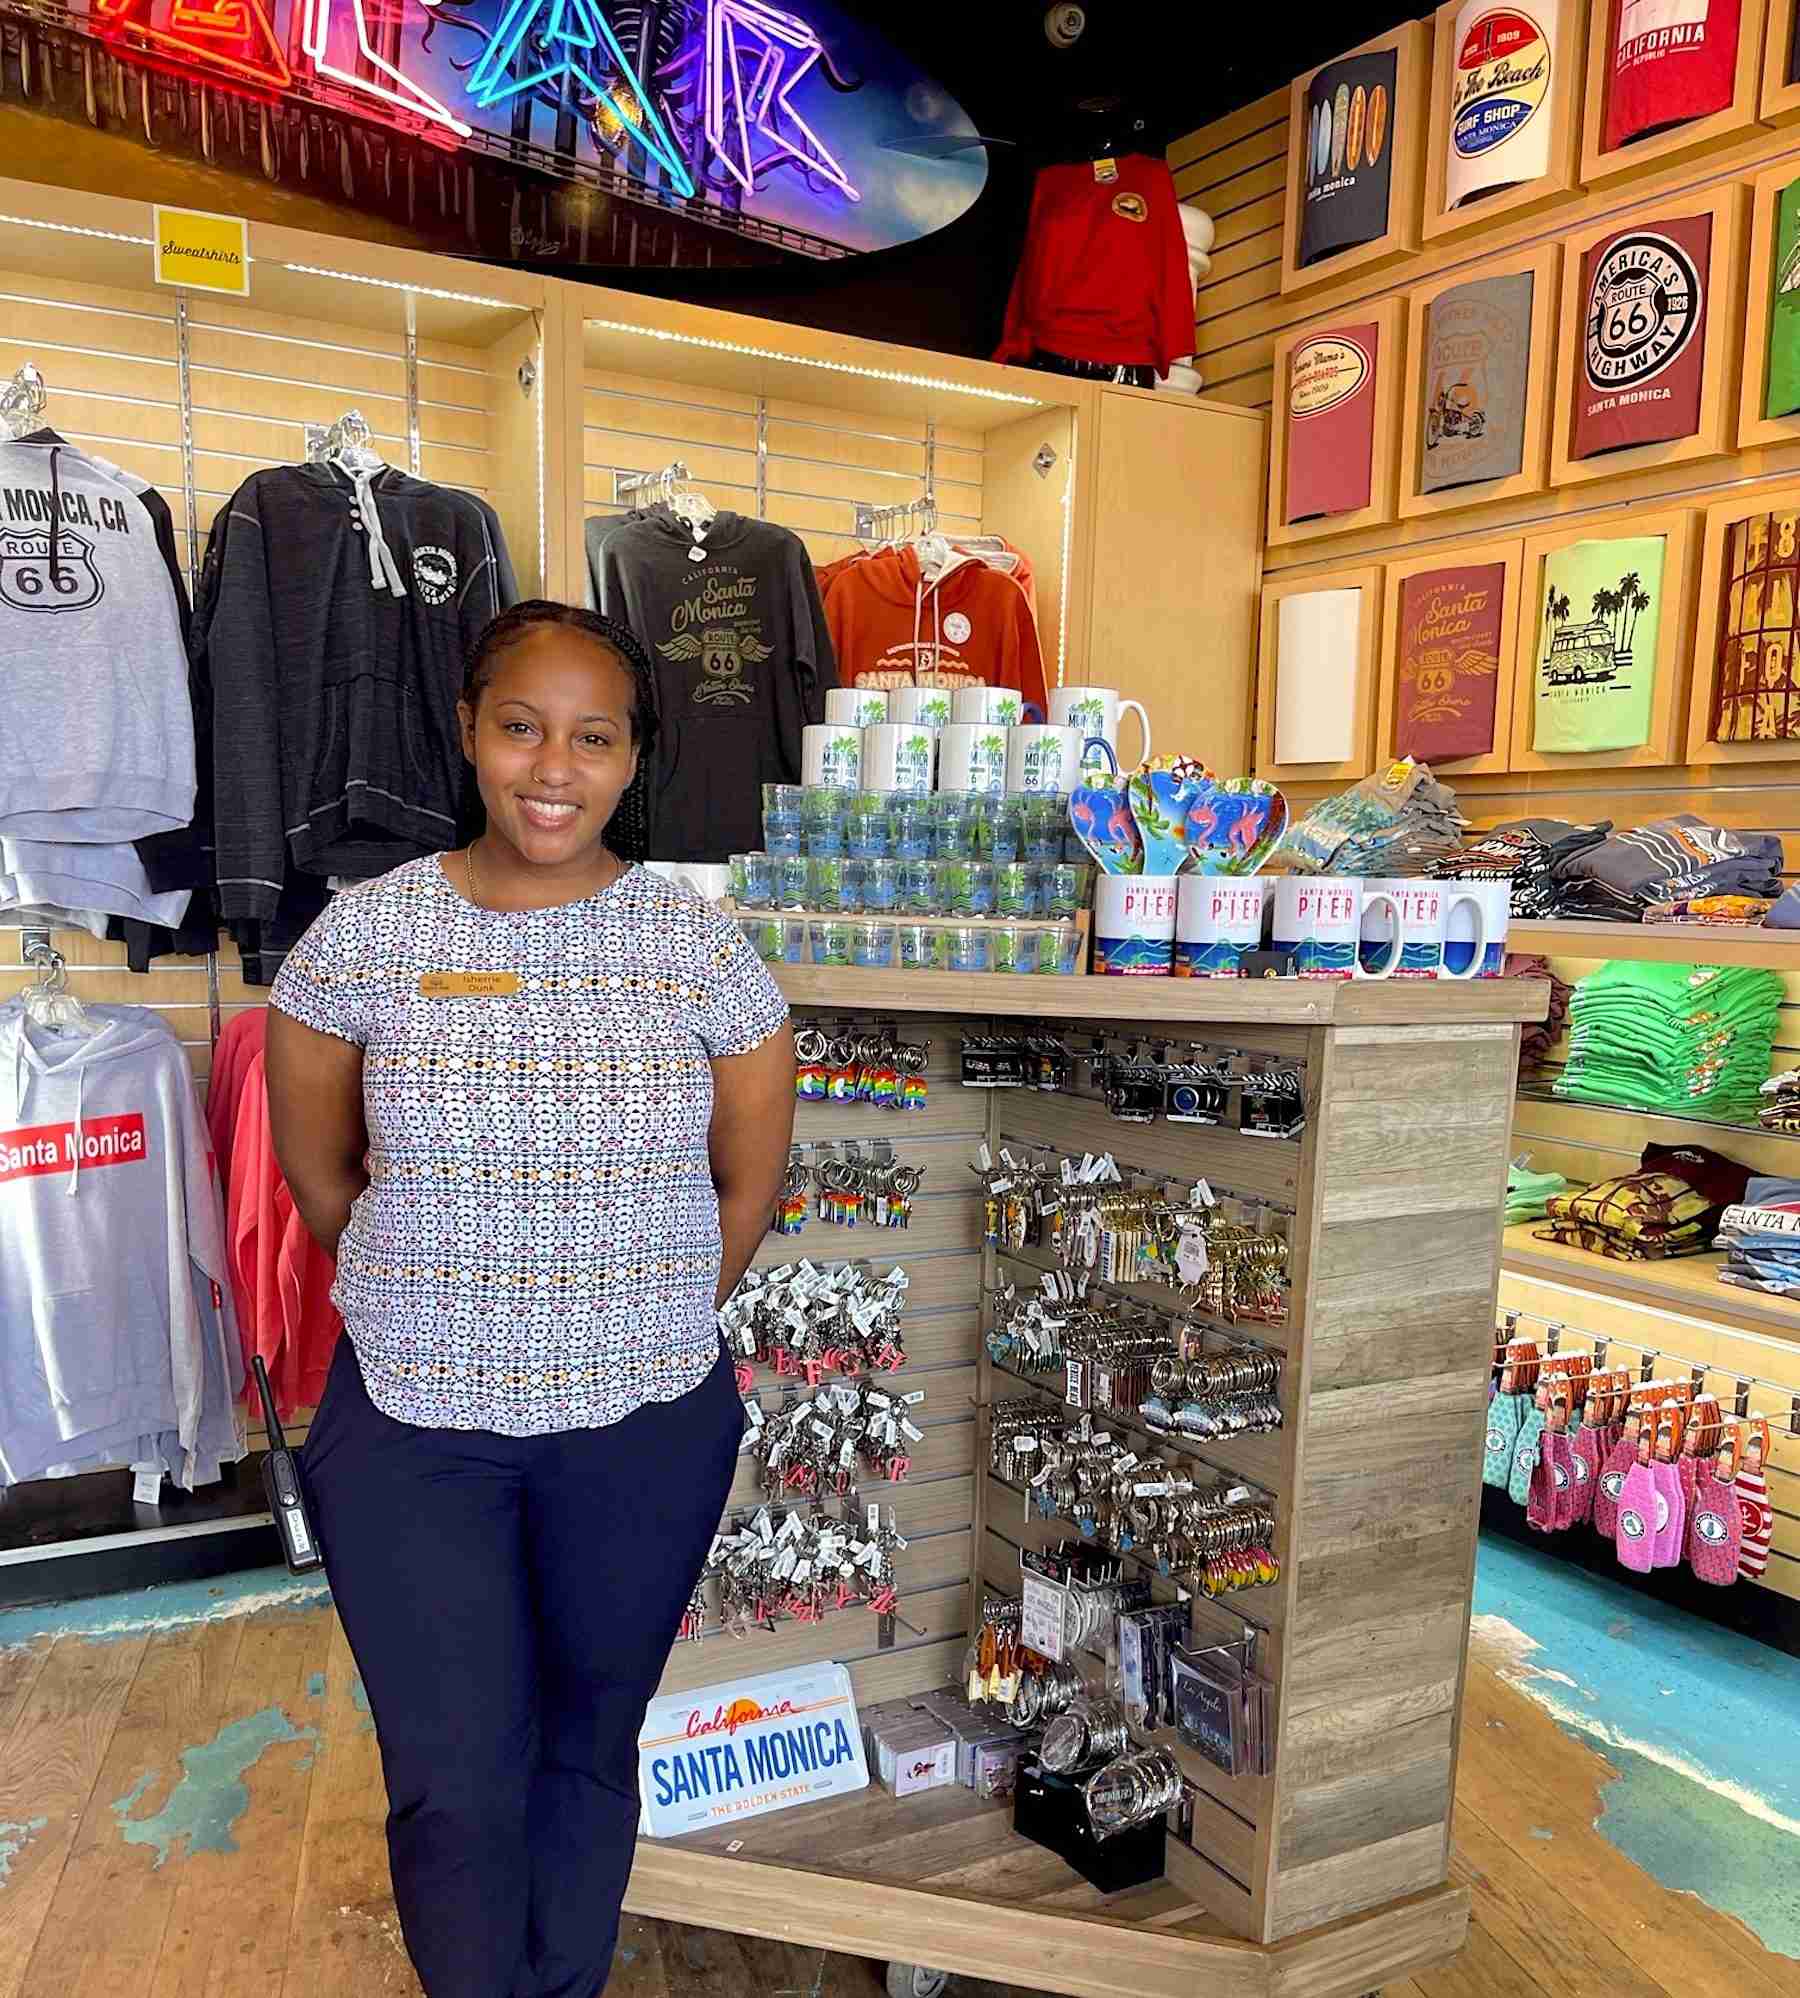 Dressing Guests with Apparel Extras  Selling Wearable Merchandise at Water Parks and Amusement Parks